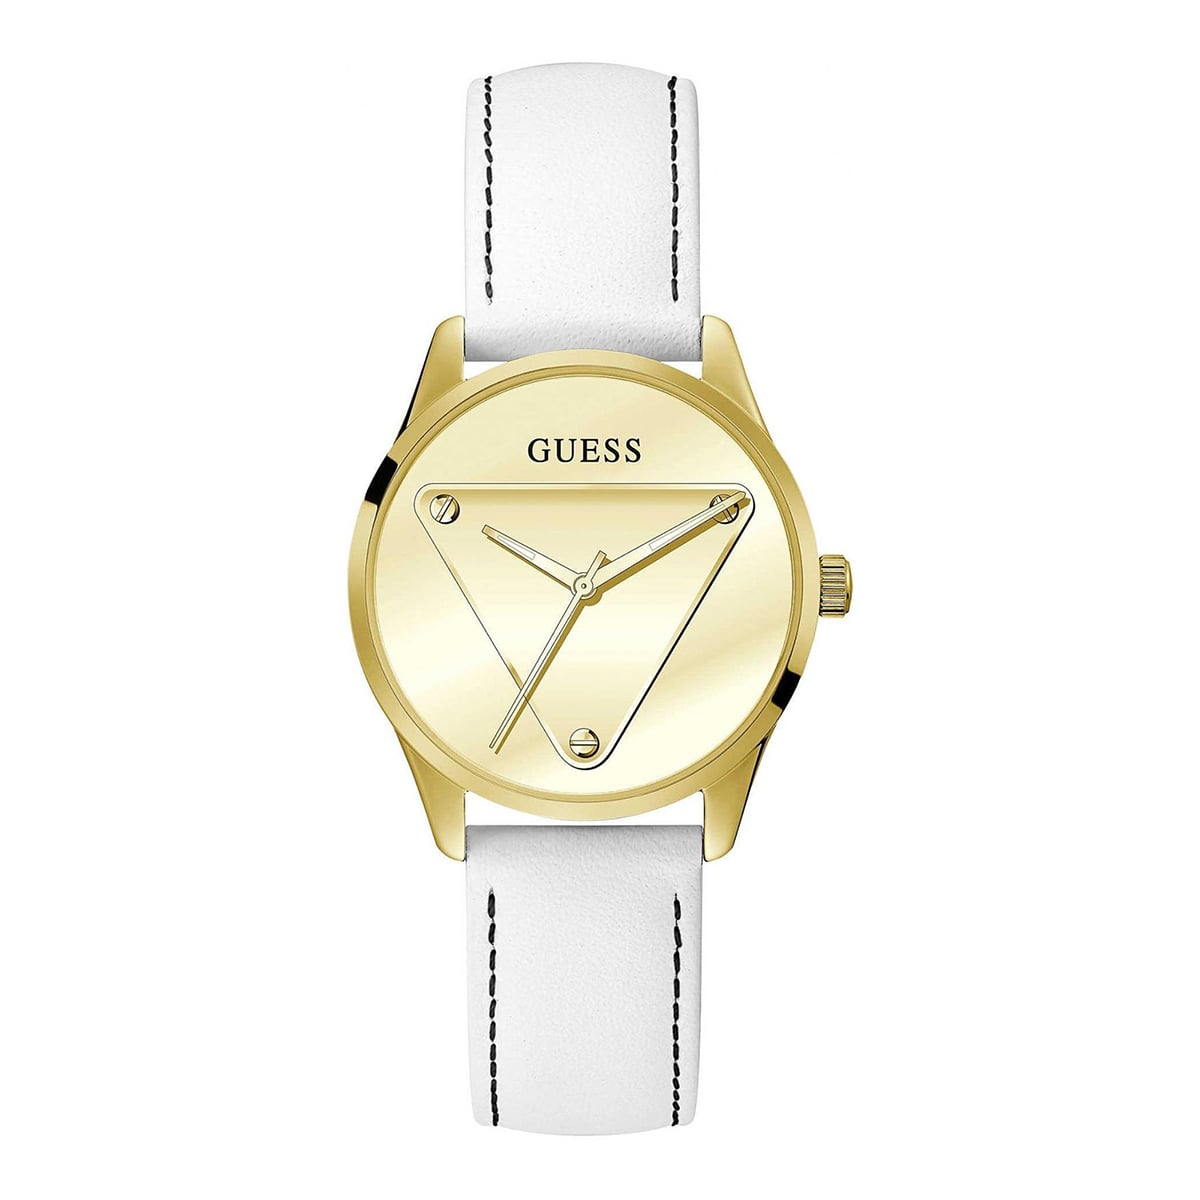 MONTRE GUESS ONLY TIME FEMME CUIR